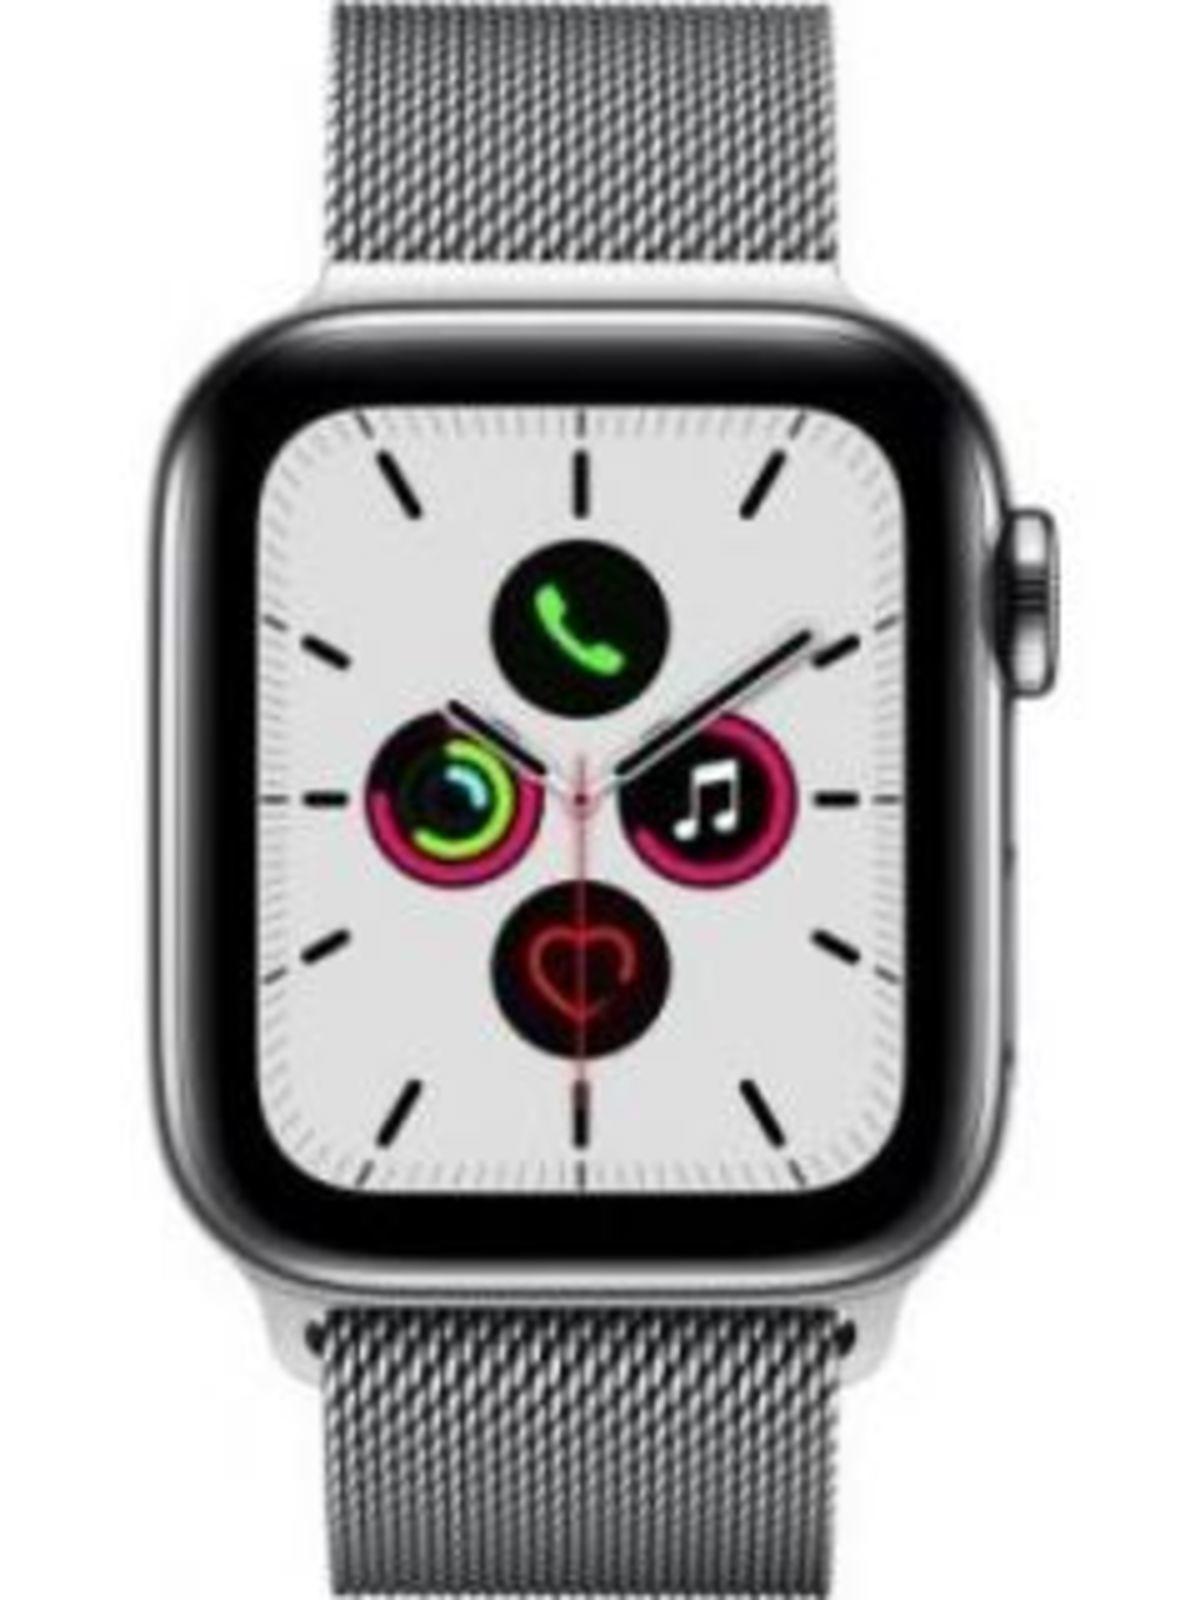 Apple Watch Series 5 Cellular 44mm Price in India, Full 